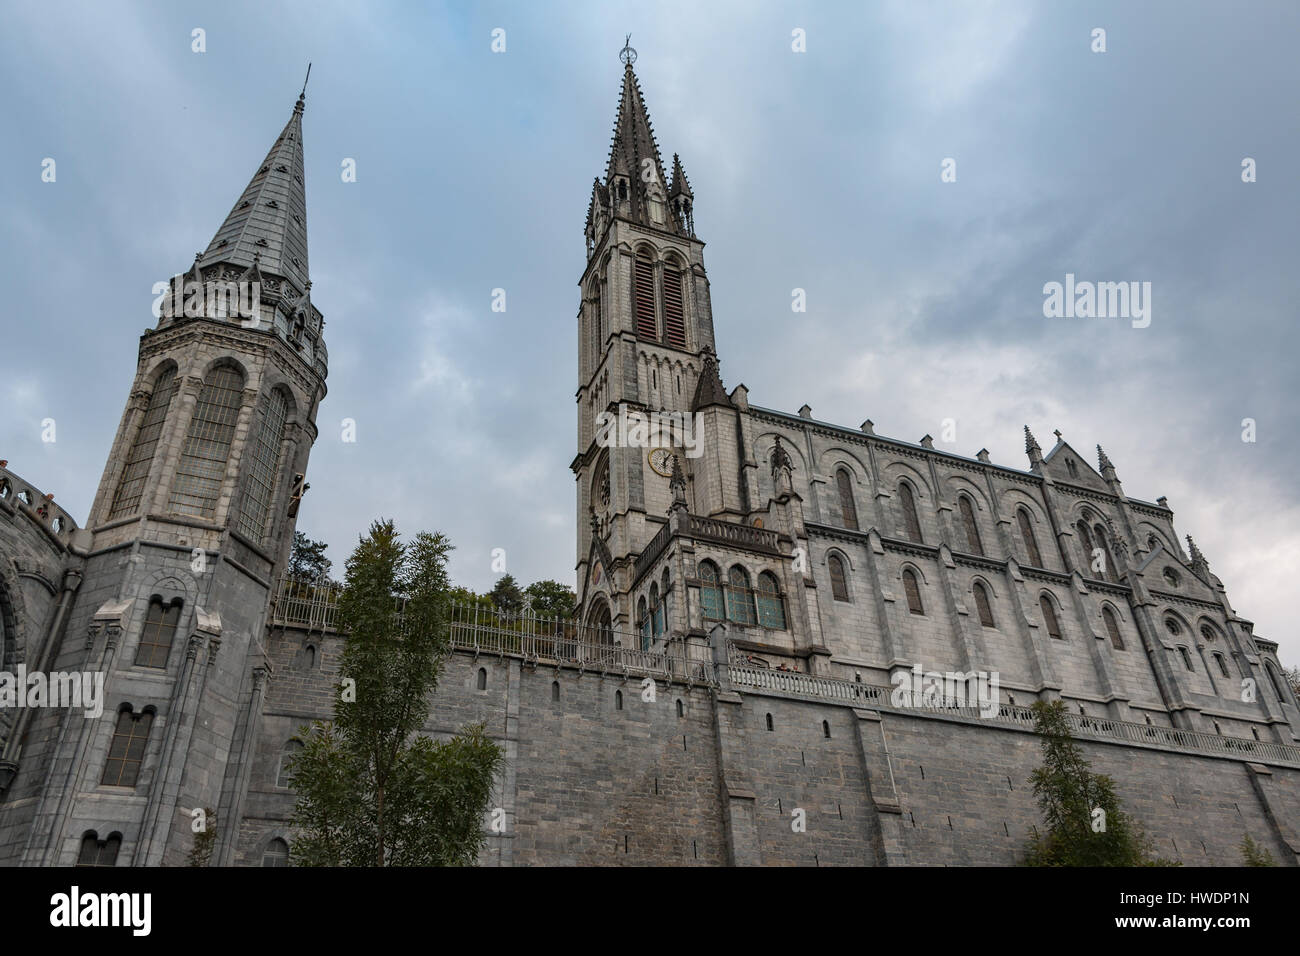 The Basilica of Our Lady in Lourdes, France Stock Photo